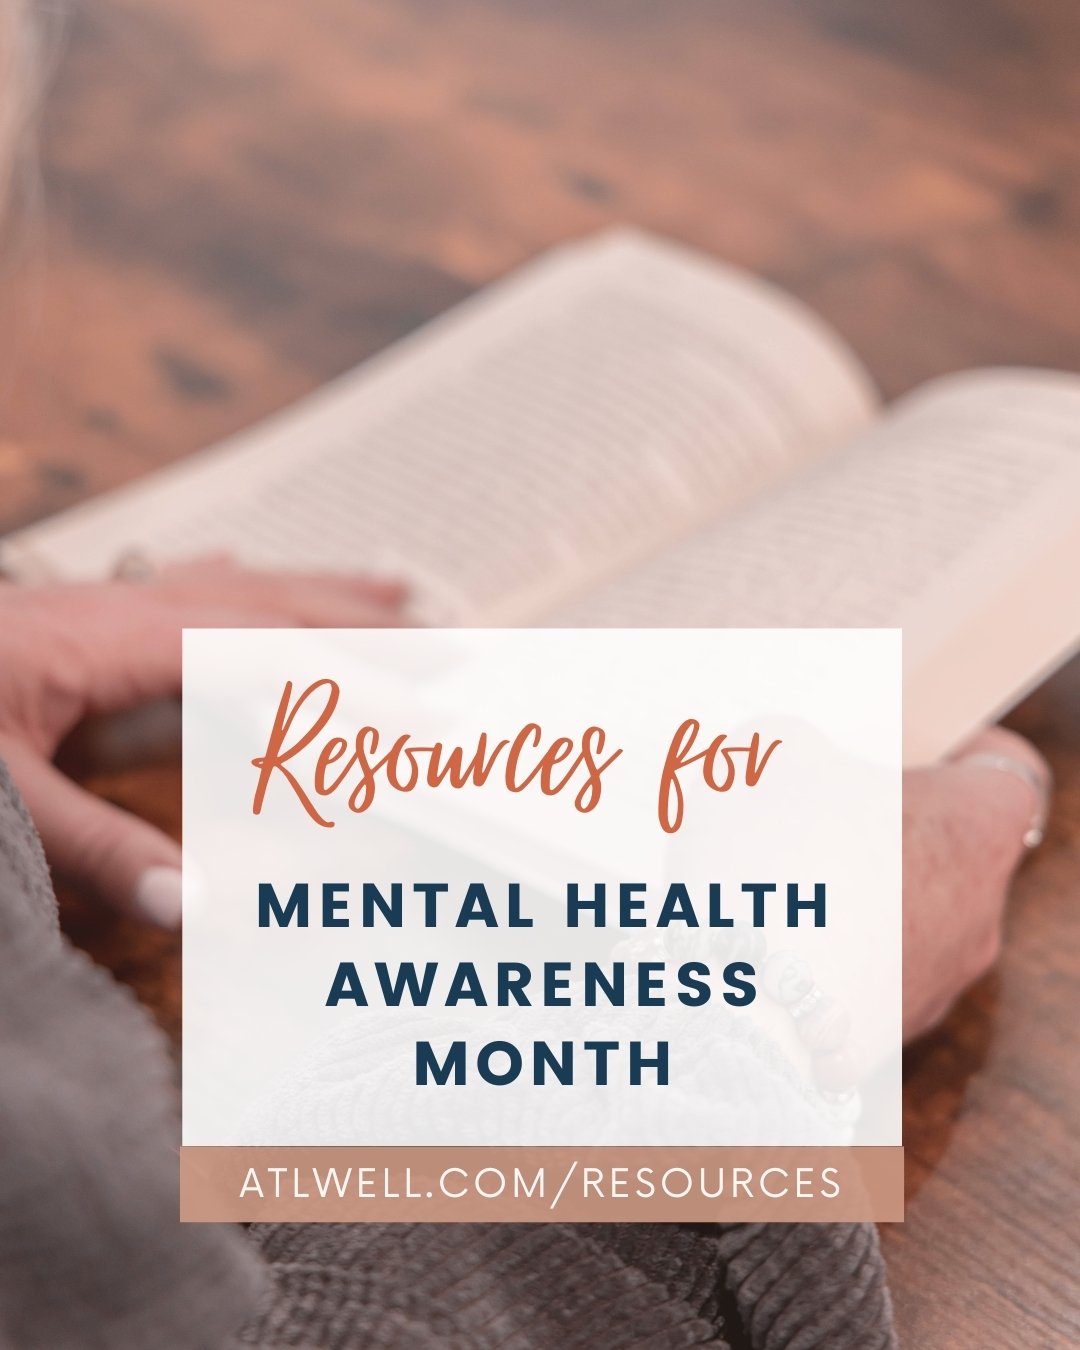 Our Resource Library is full of resources to help support your wellbeing for Mental Health Awareness Month. 📖

Swipe ➡️ to see just some of the available handouts we currently have available to you. See the full list at atlwell.com/resources.

#ment